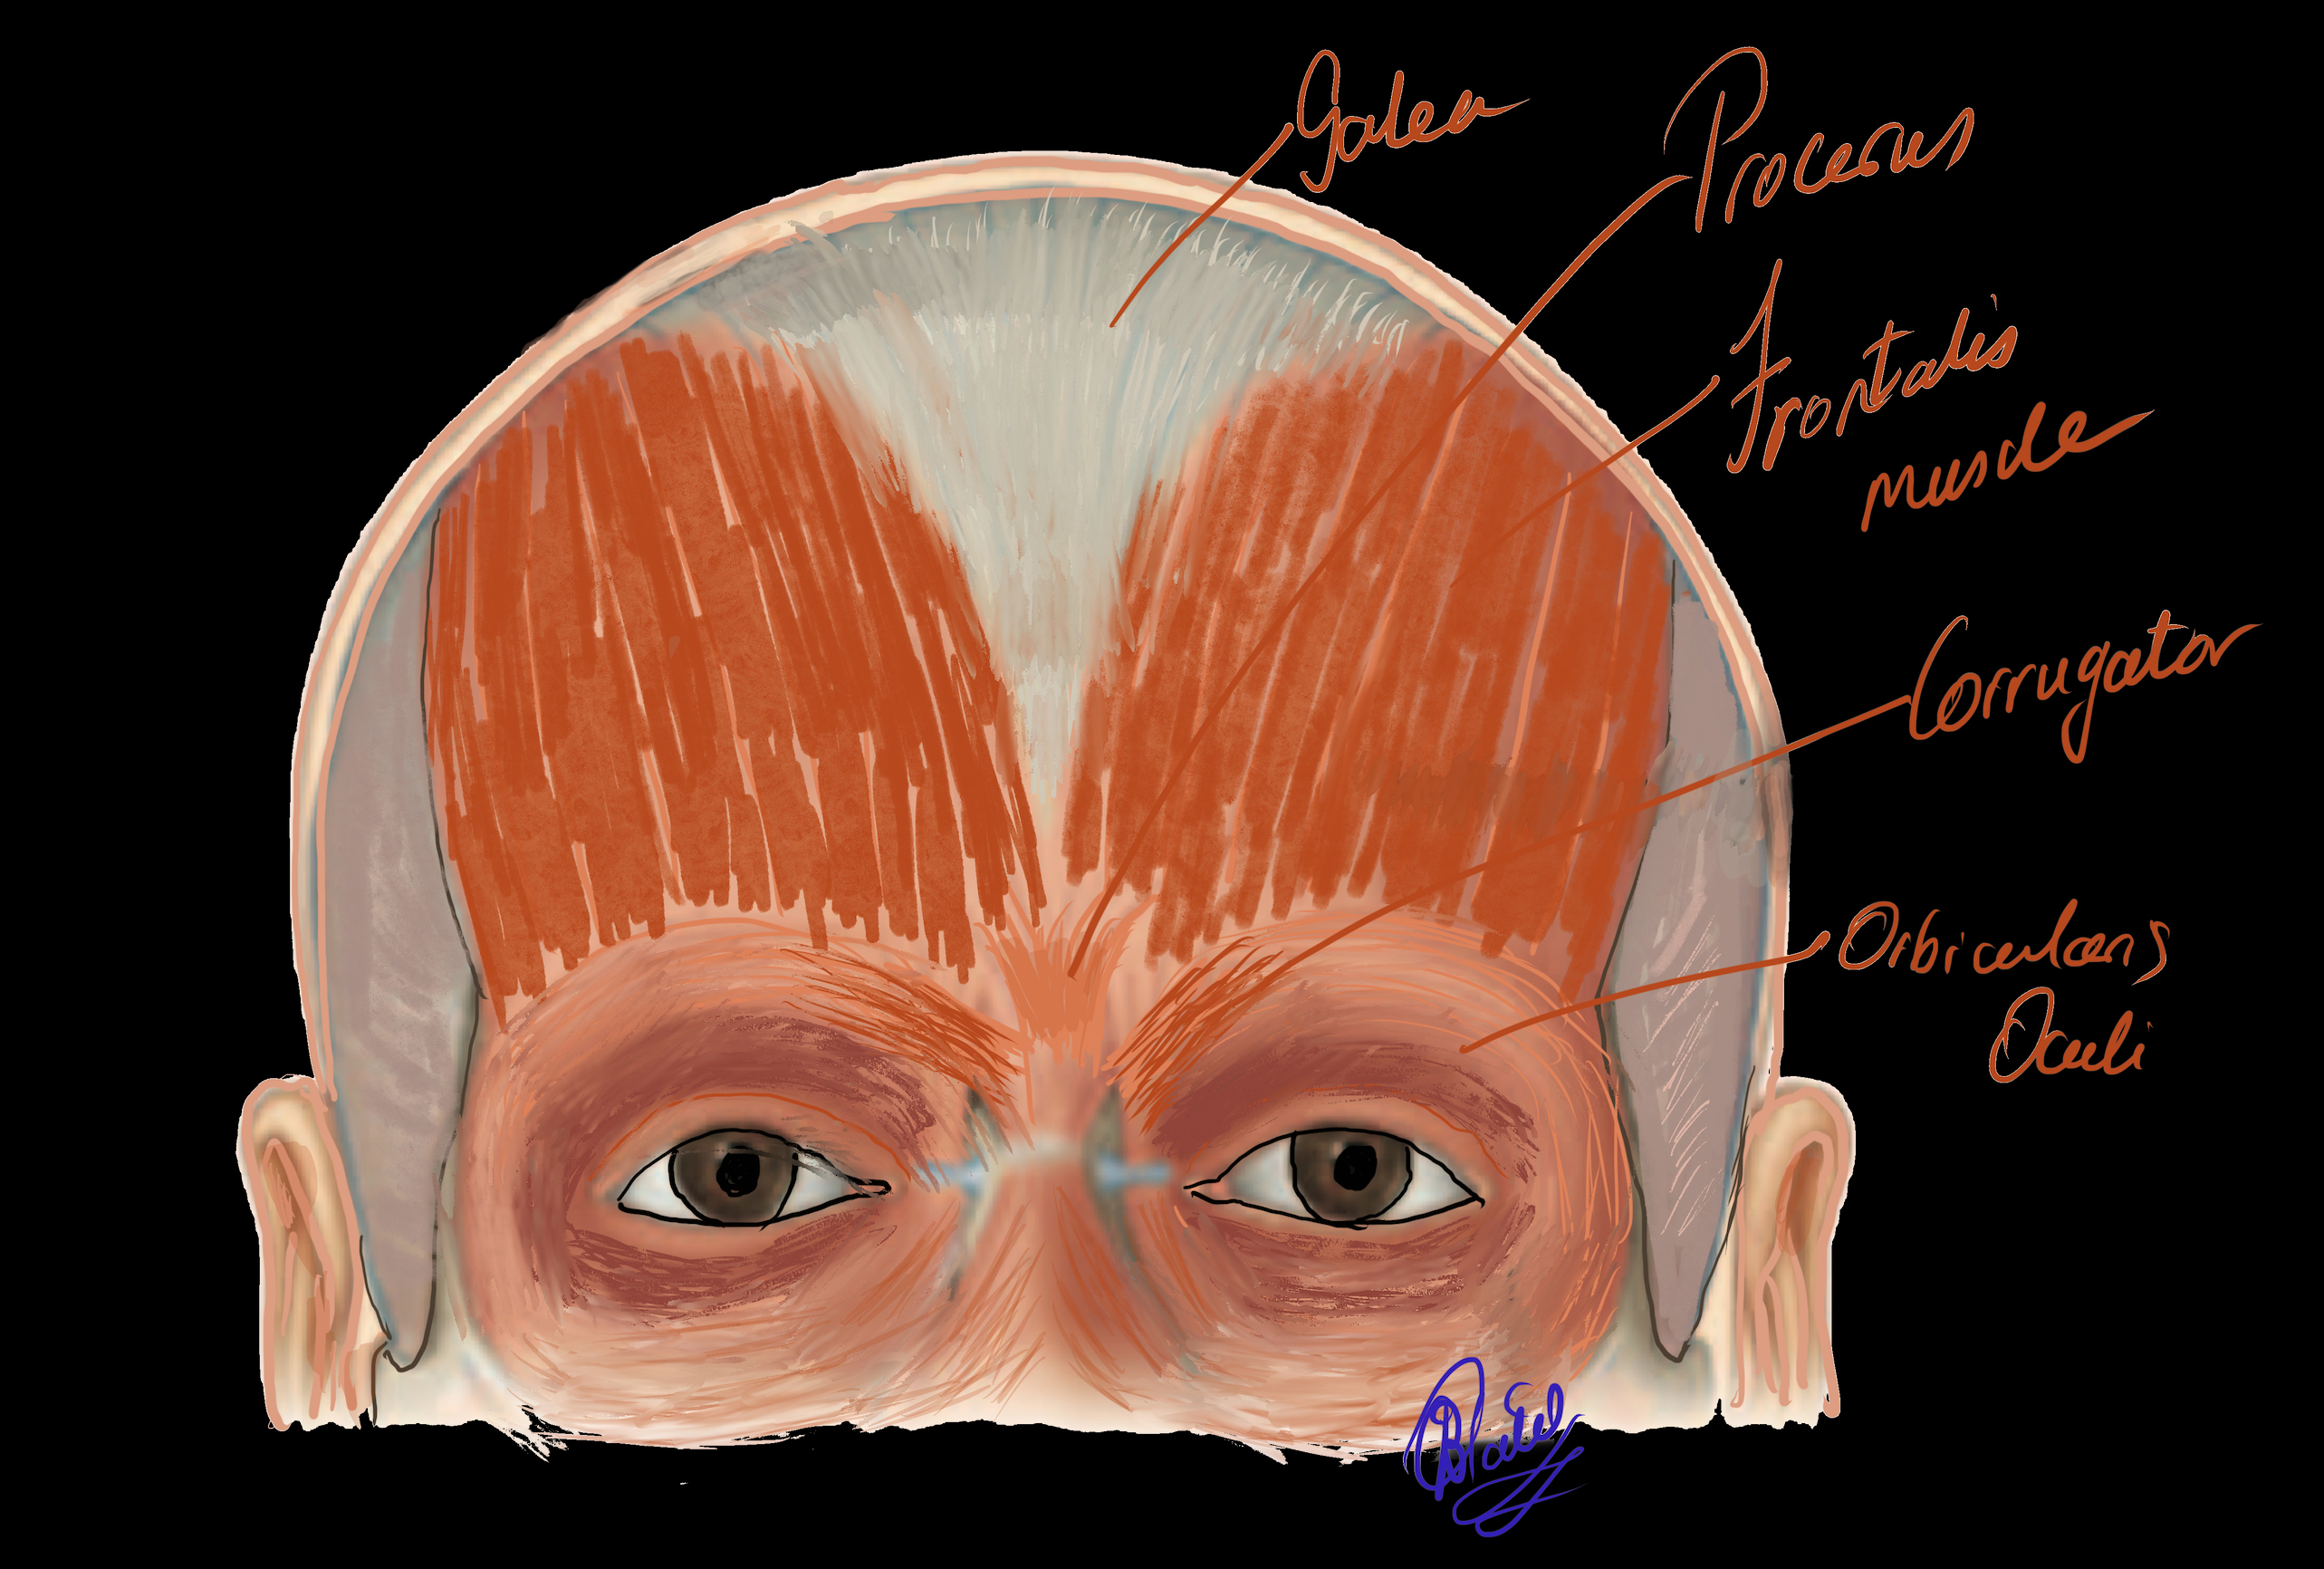 The Fronatlis Muscle which is the only elevator of the brow